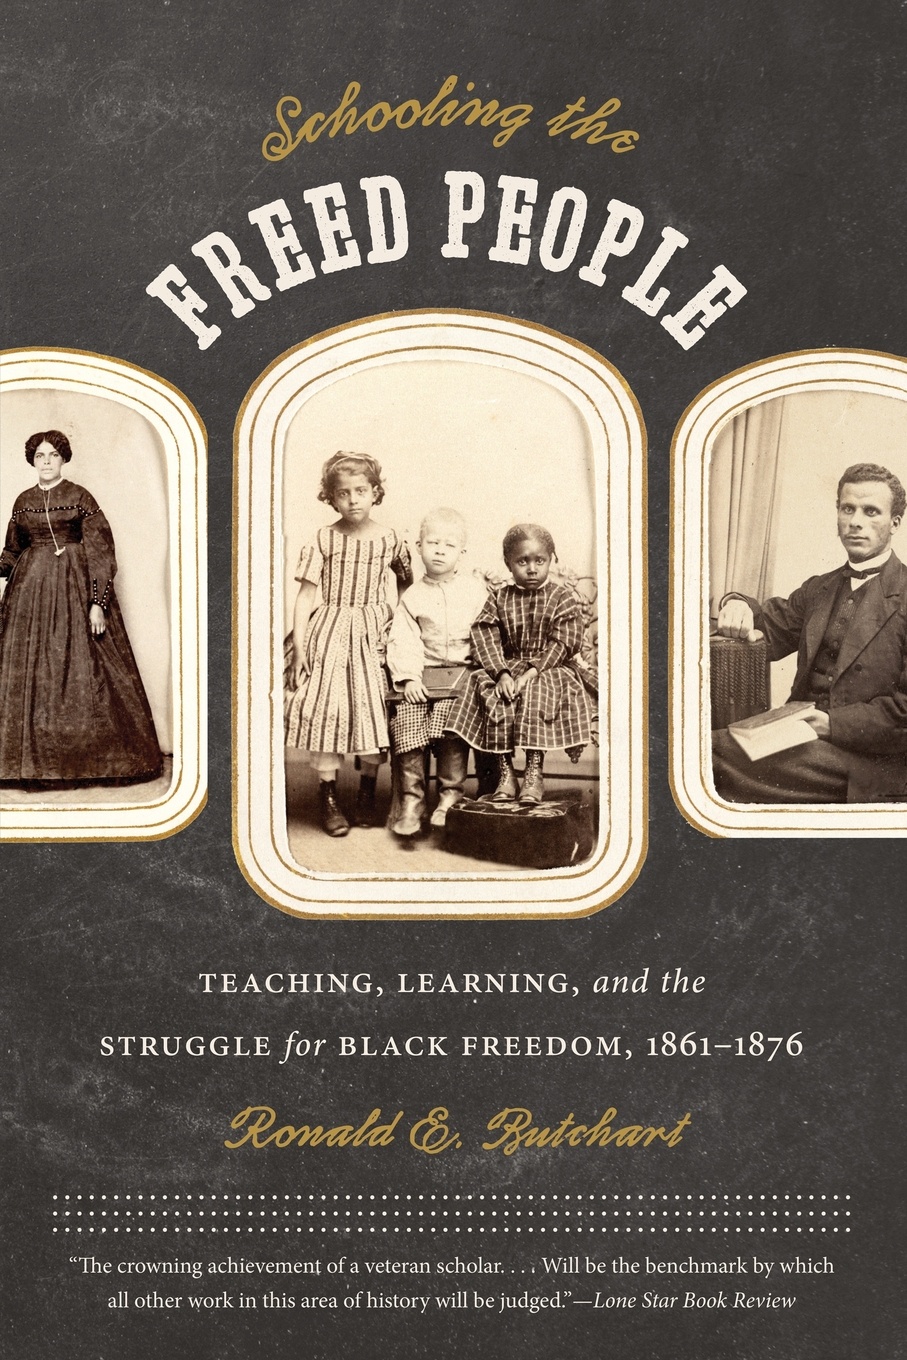 Schooling the Freed People. Teaching, Learning, and the Struggle for Black Freedom, 1861-1876